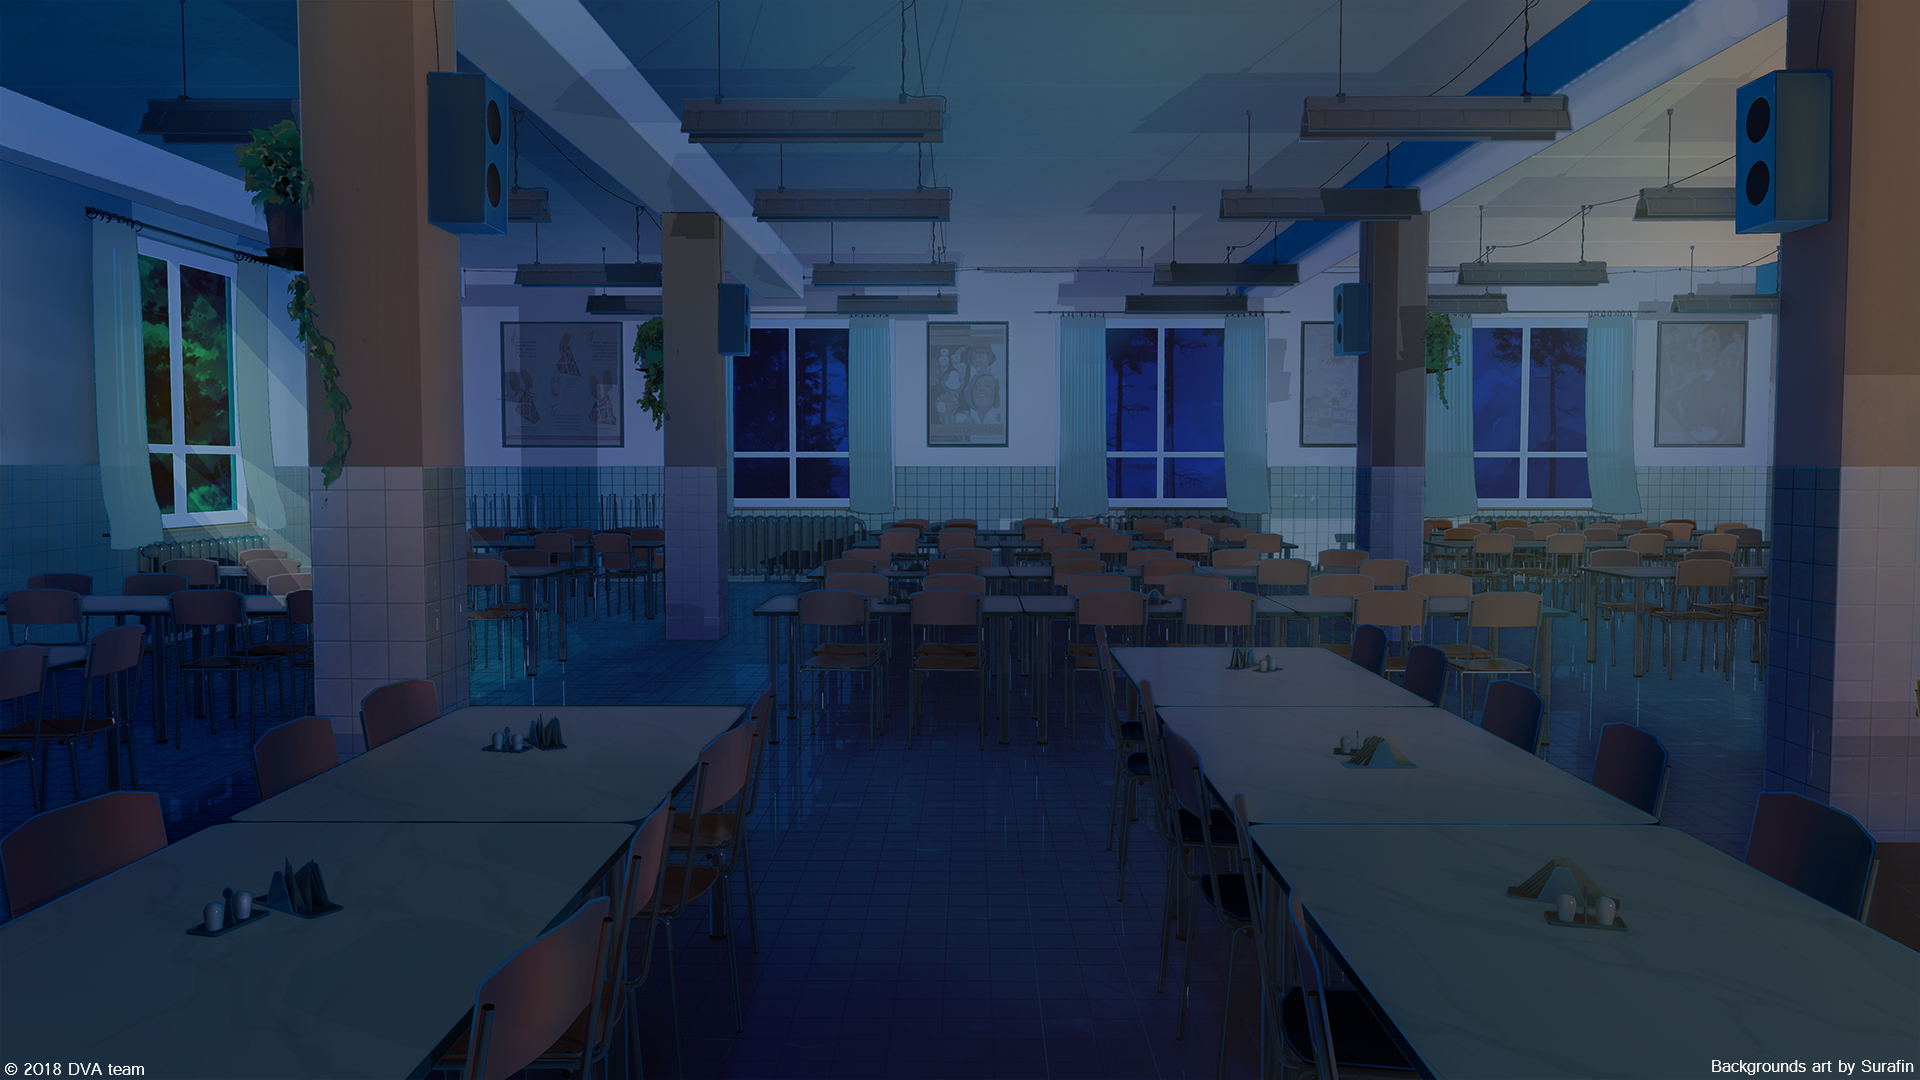 In Need of a Cafeteria Background! - Art Resources - Episode Forums